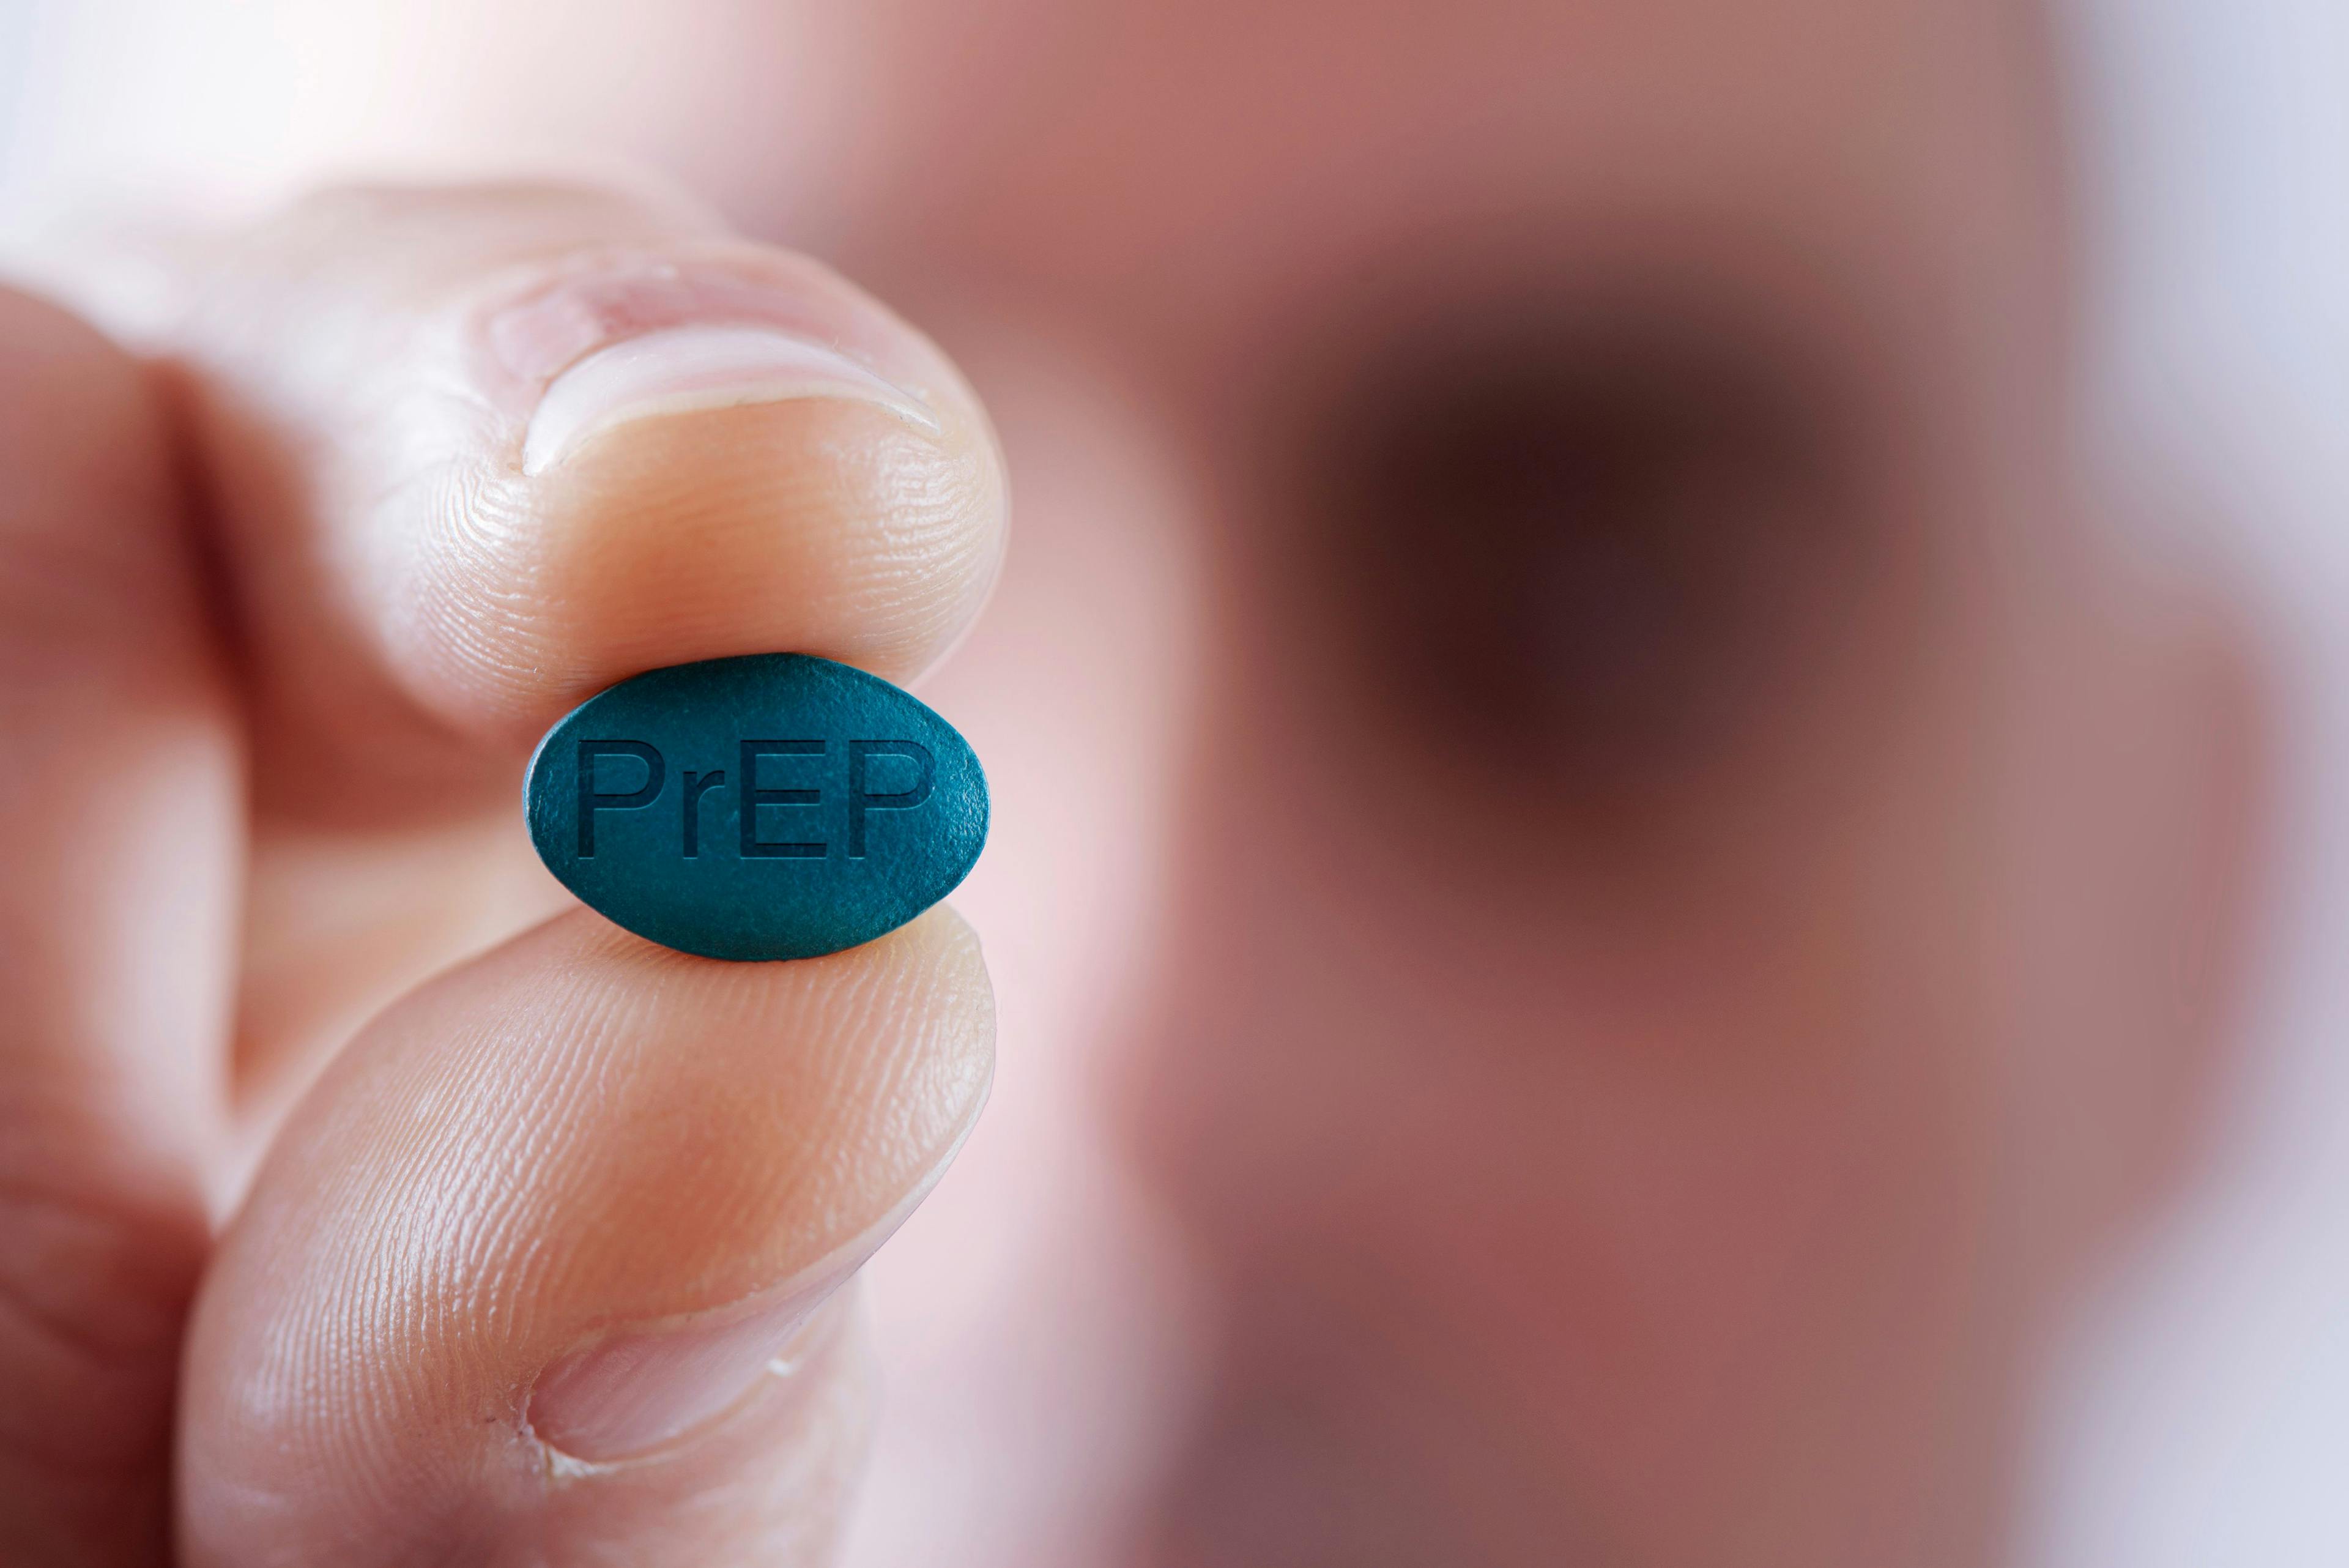 young man with a PrEP pill | Image credit: nito – stock.adobe.com